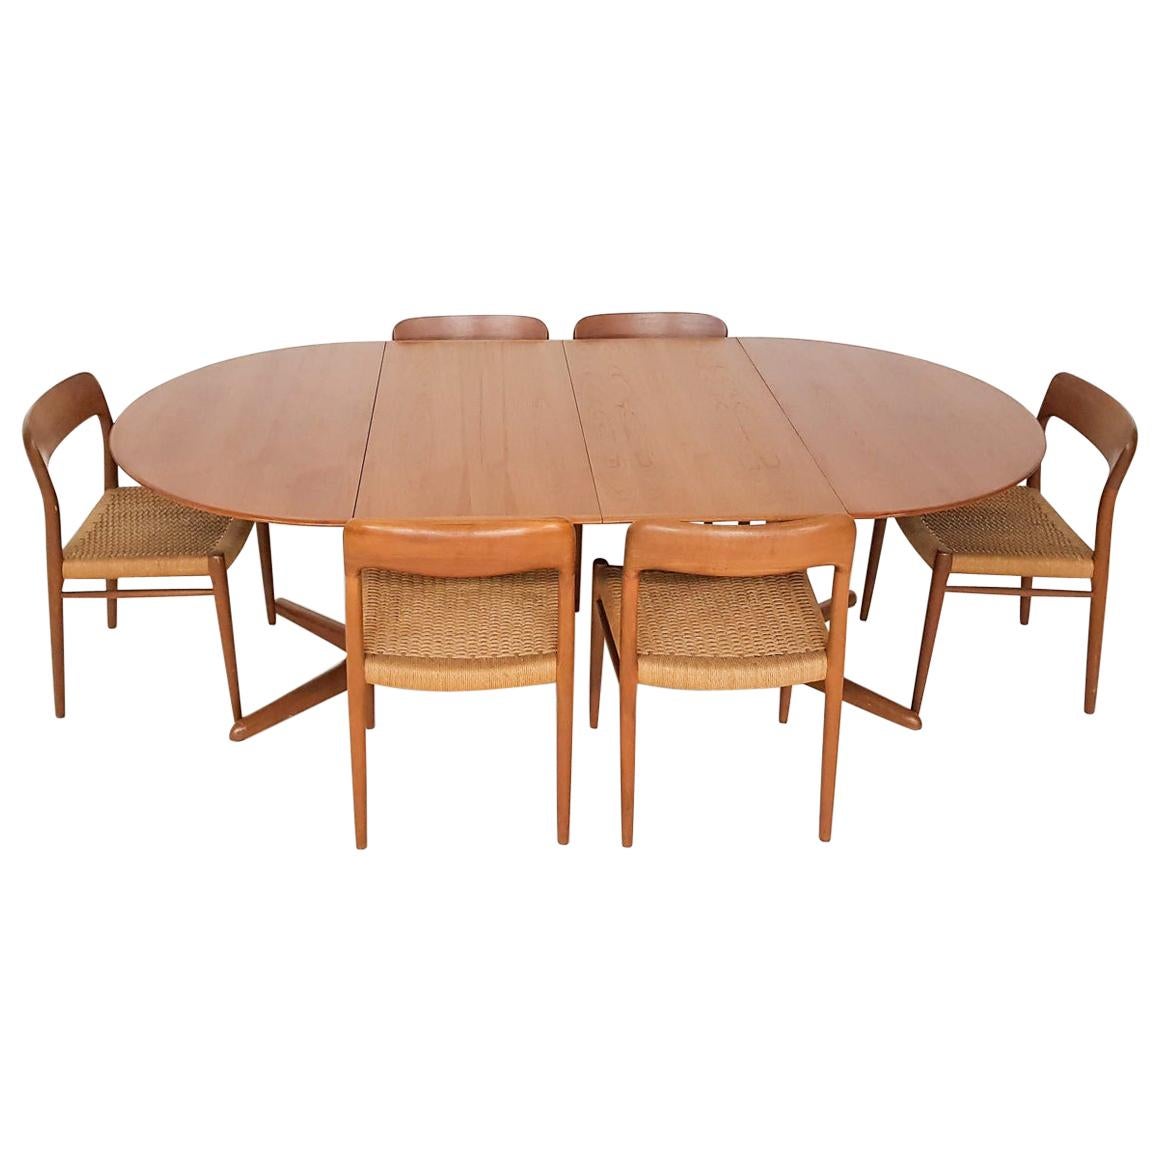 Niels Otto Møller "Model 75" Teak and Paper Cord Dining Chairs and Table, 1950s